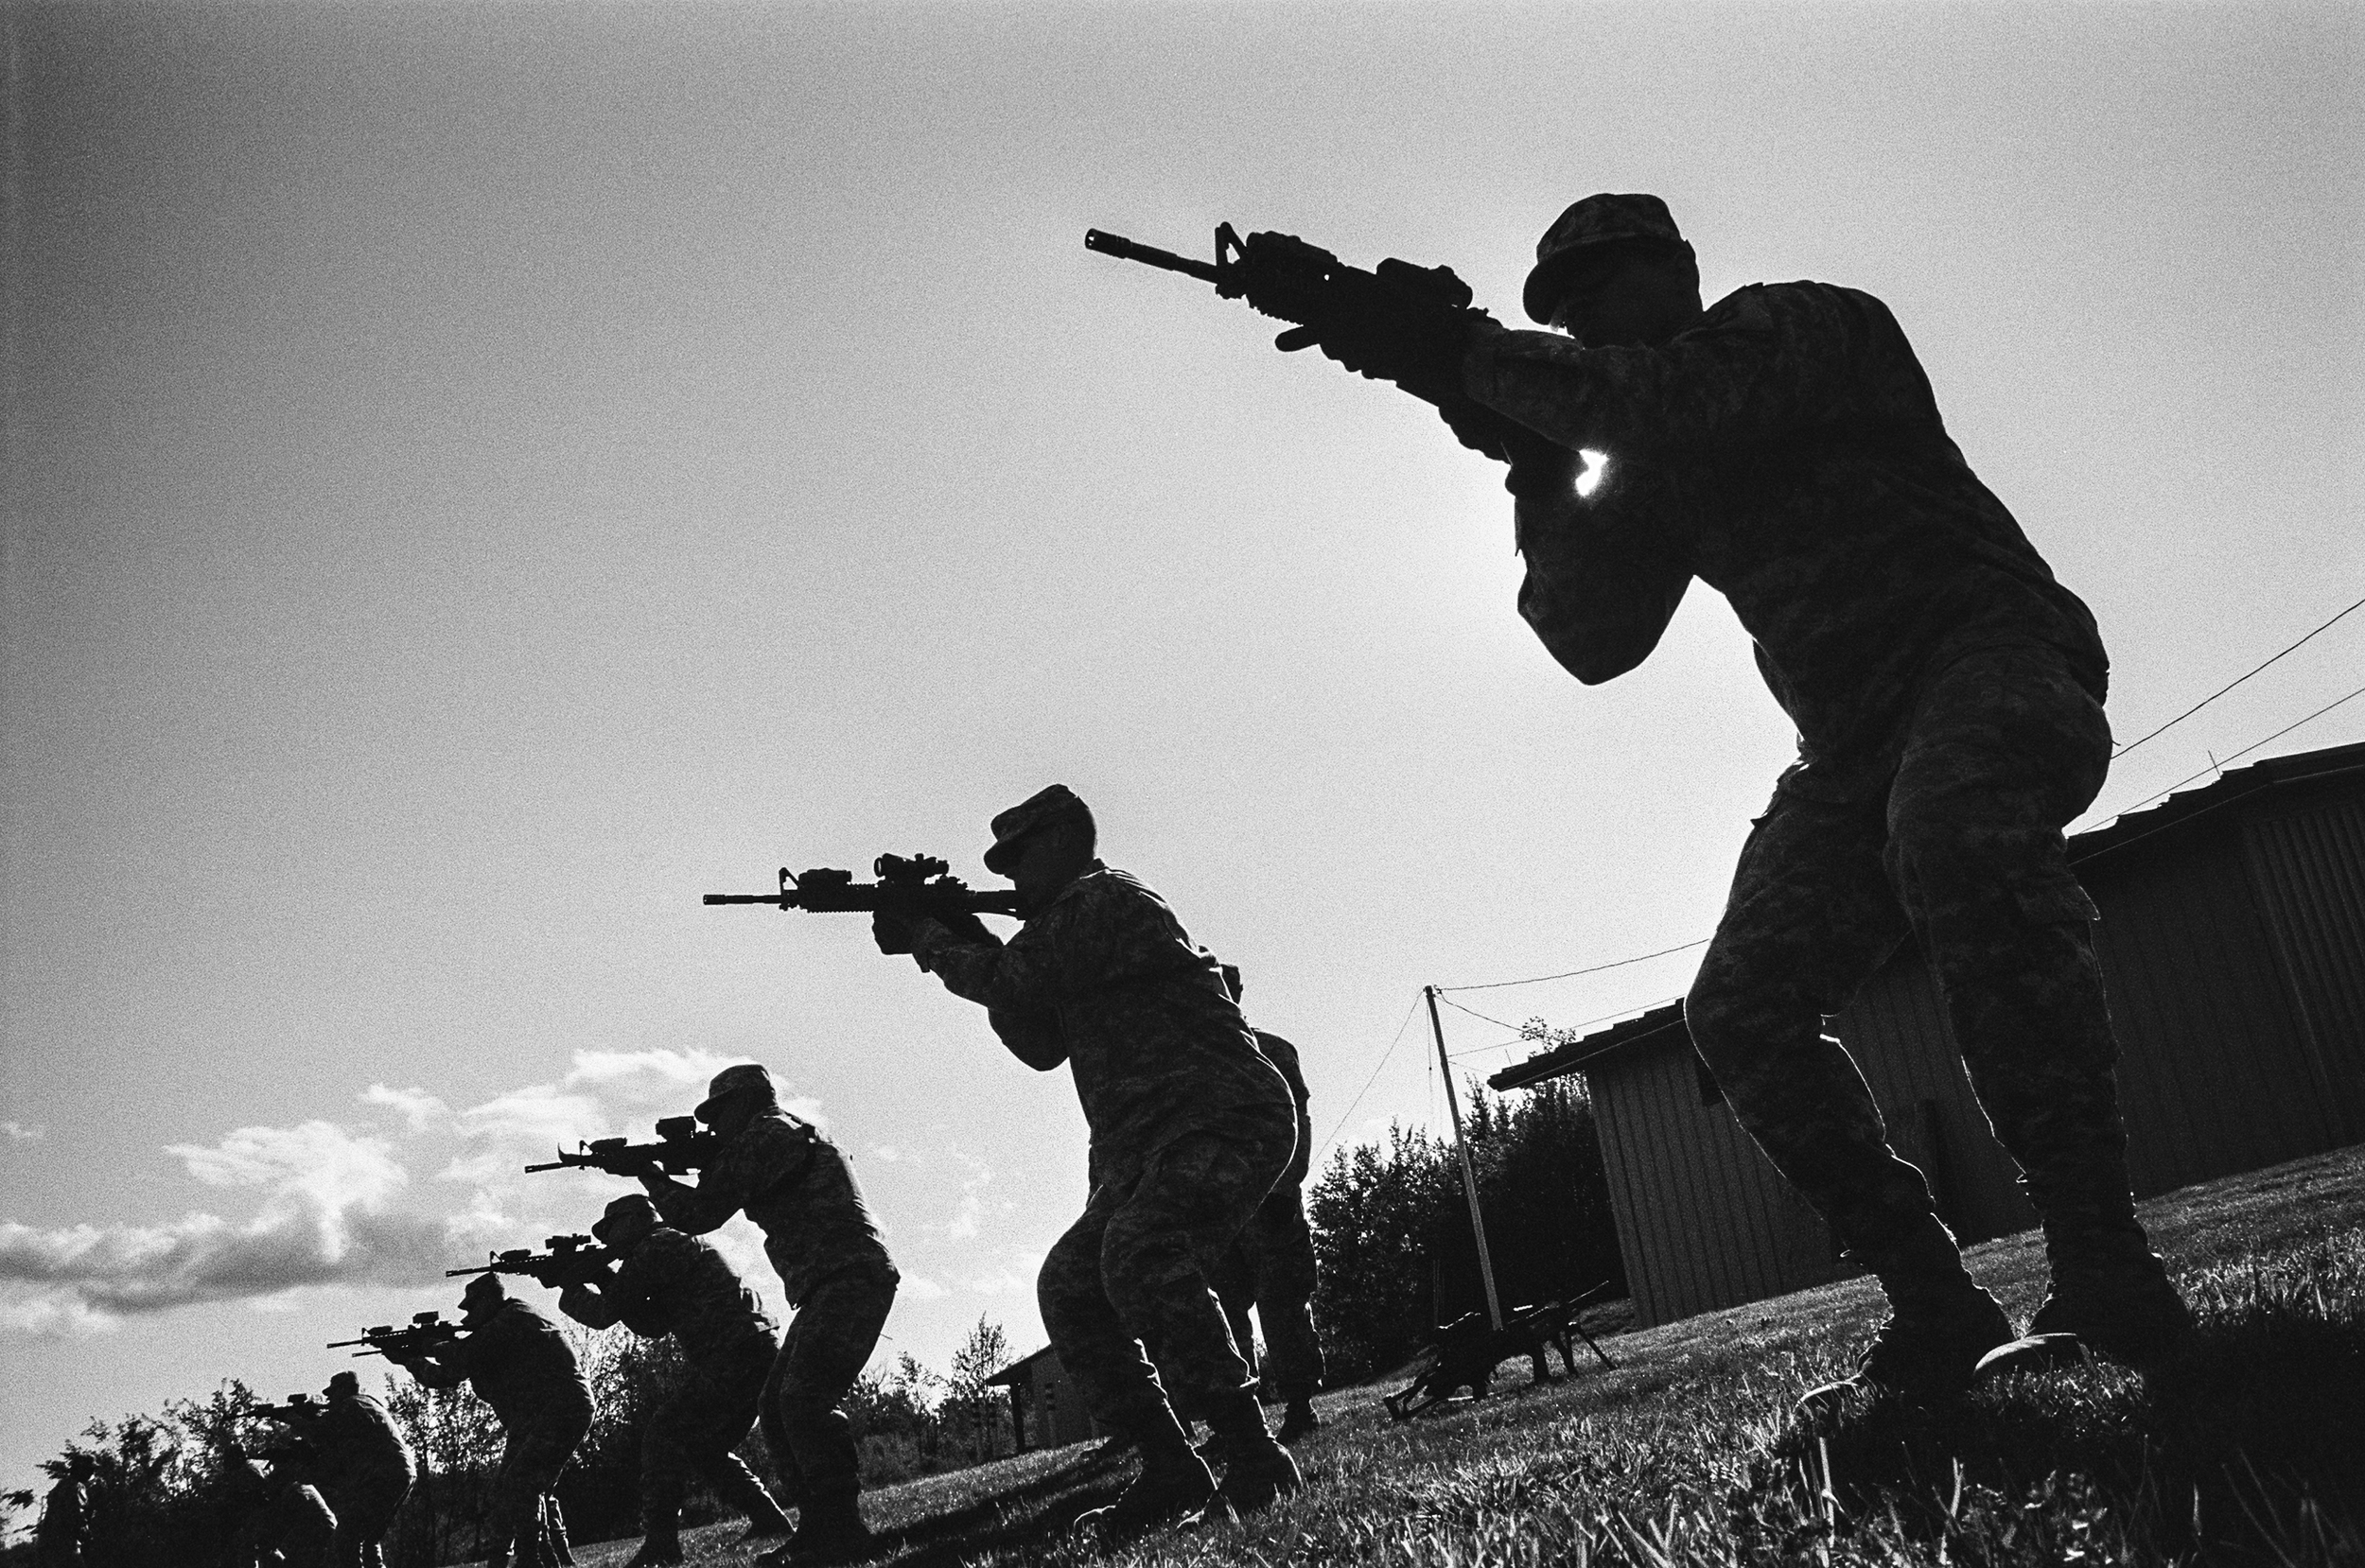  Soldiers participate in training drills at Fort Drum, New York,&nbsp;2010. 